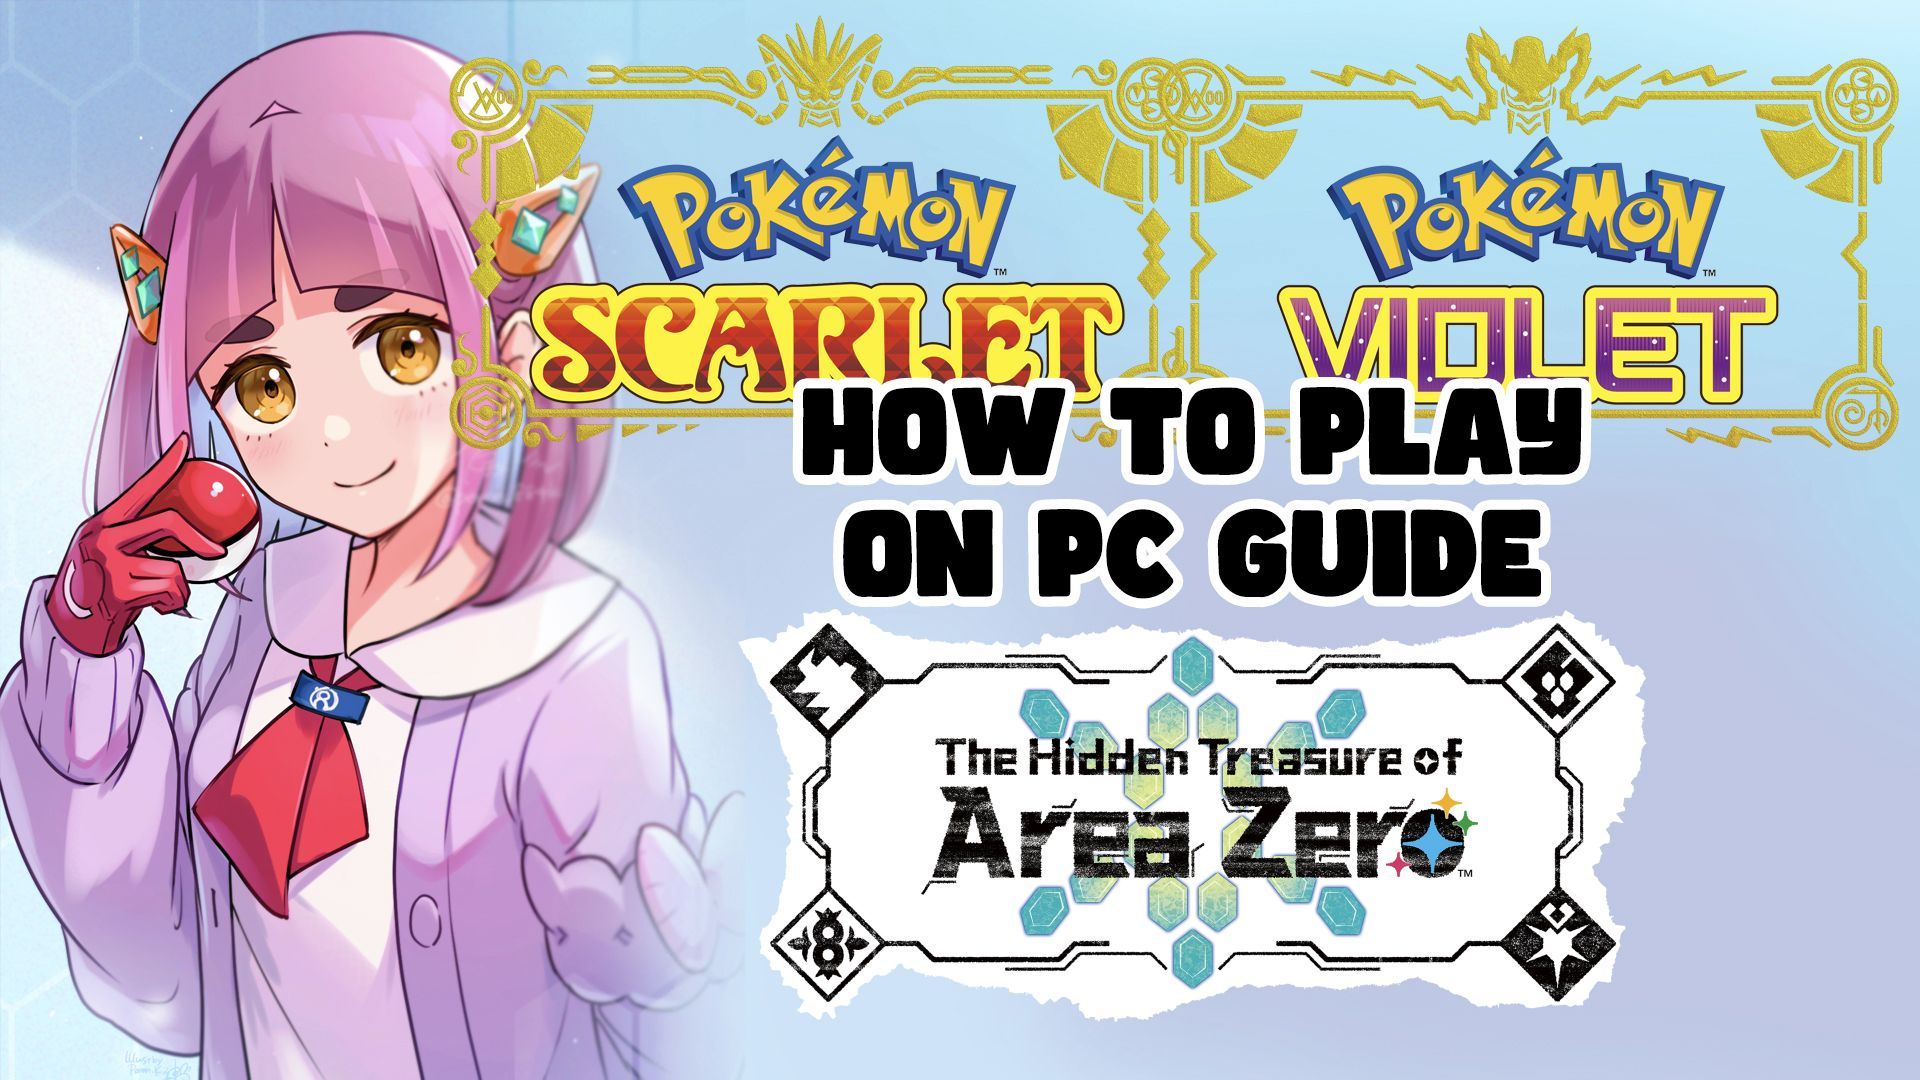 How to play Pokemon on PC